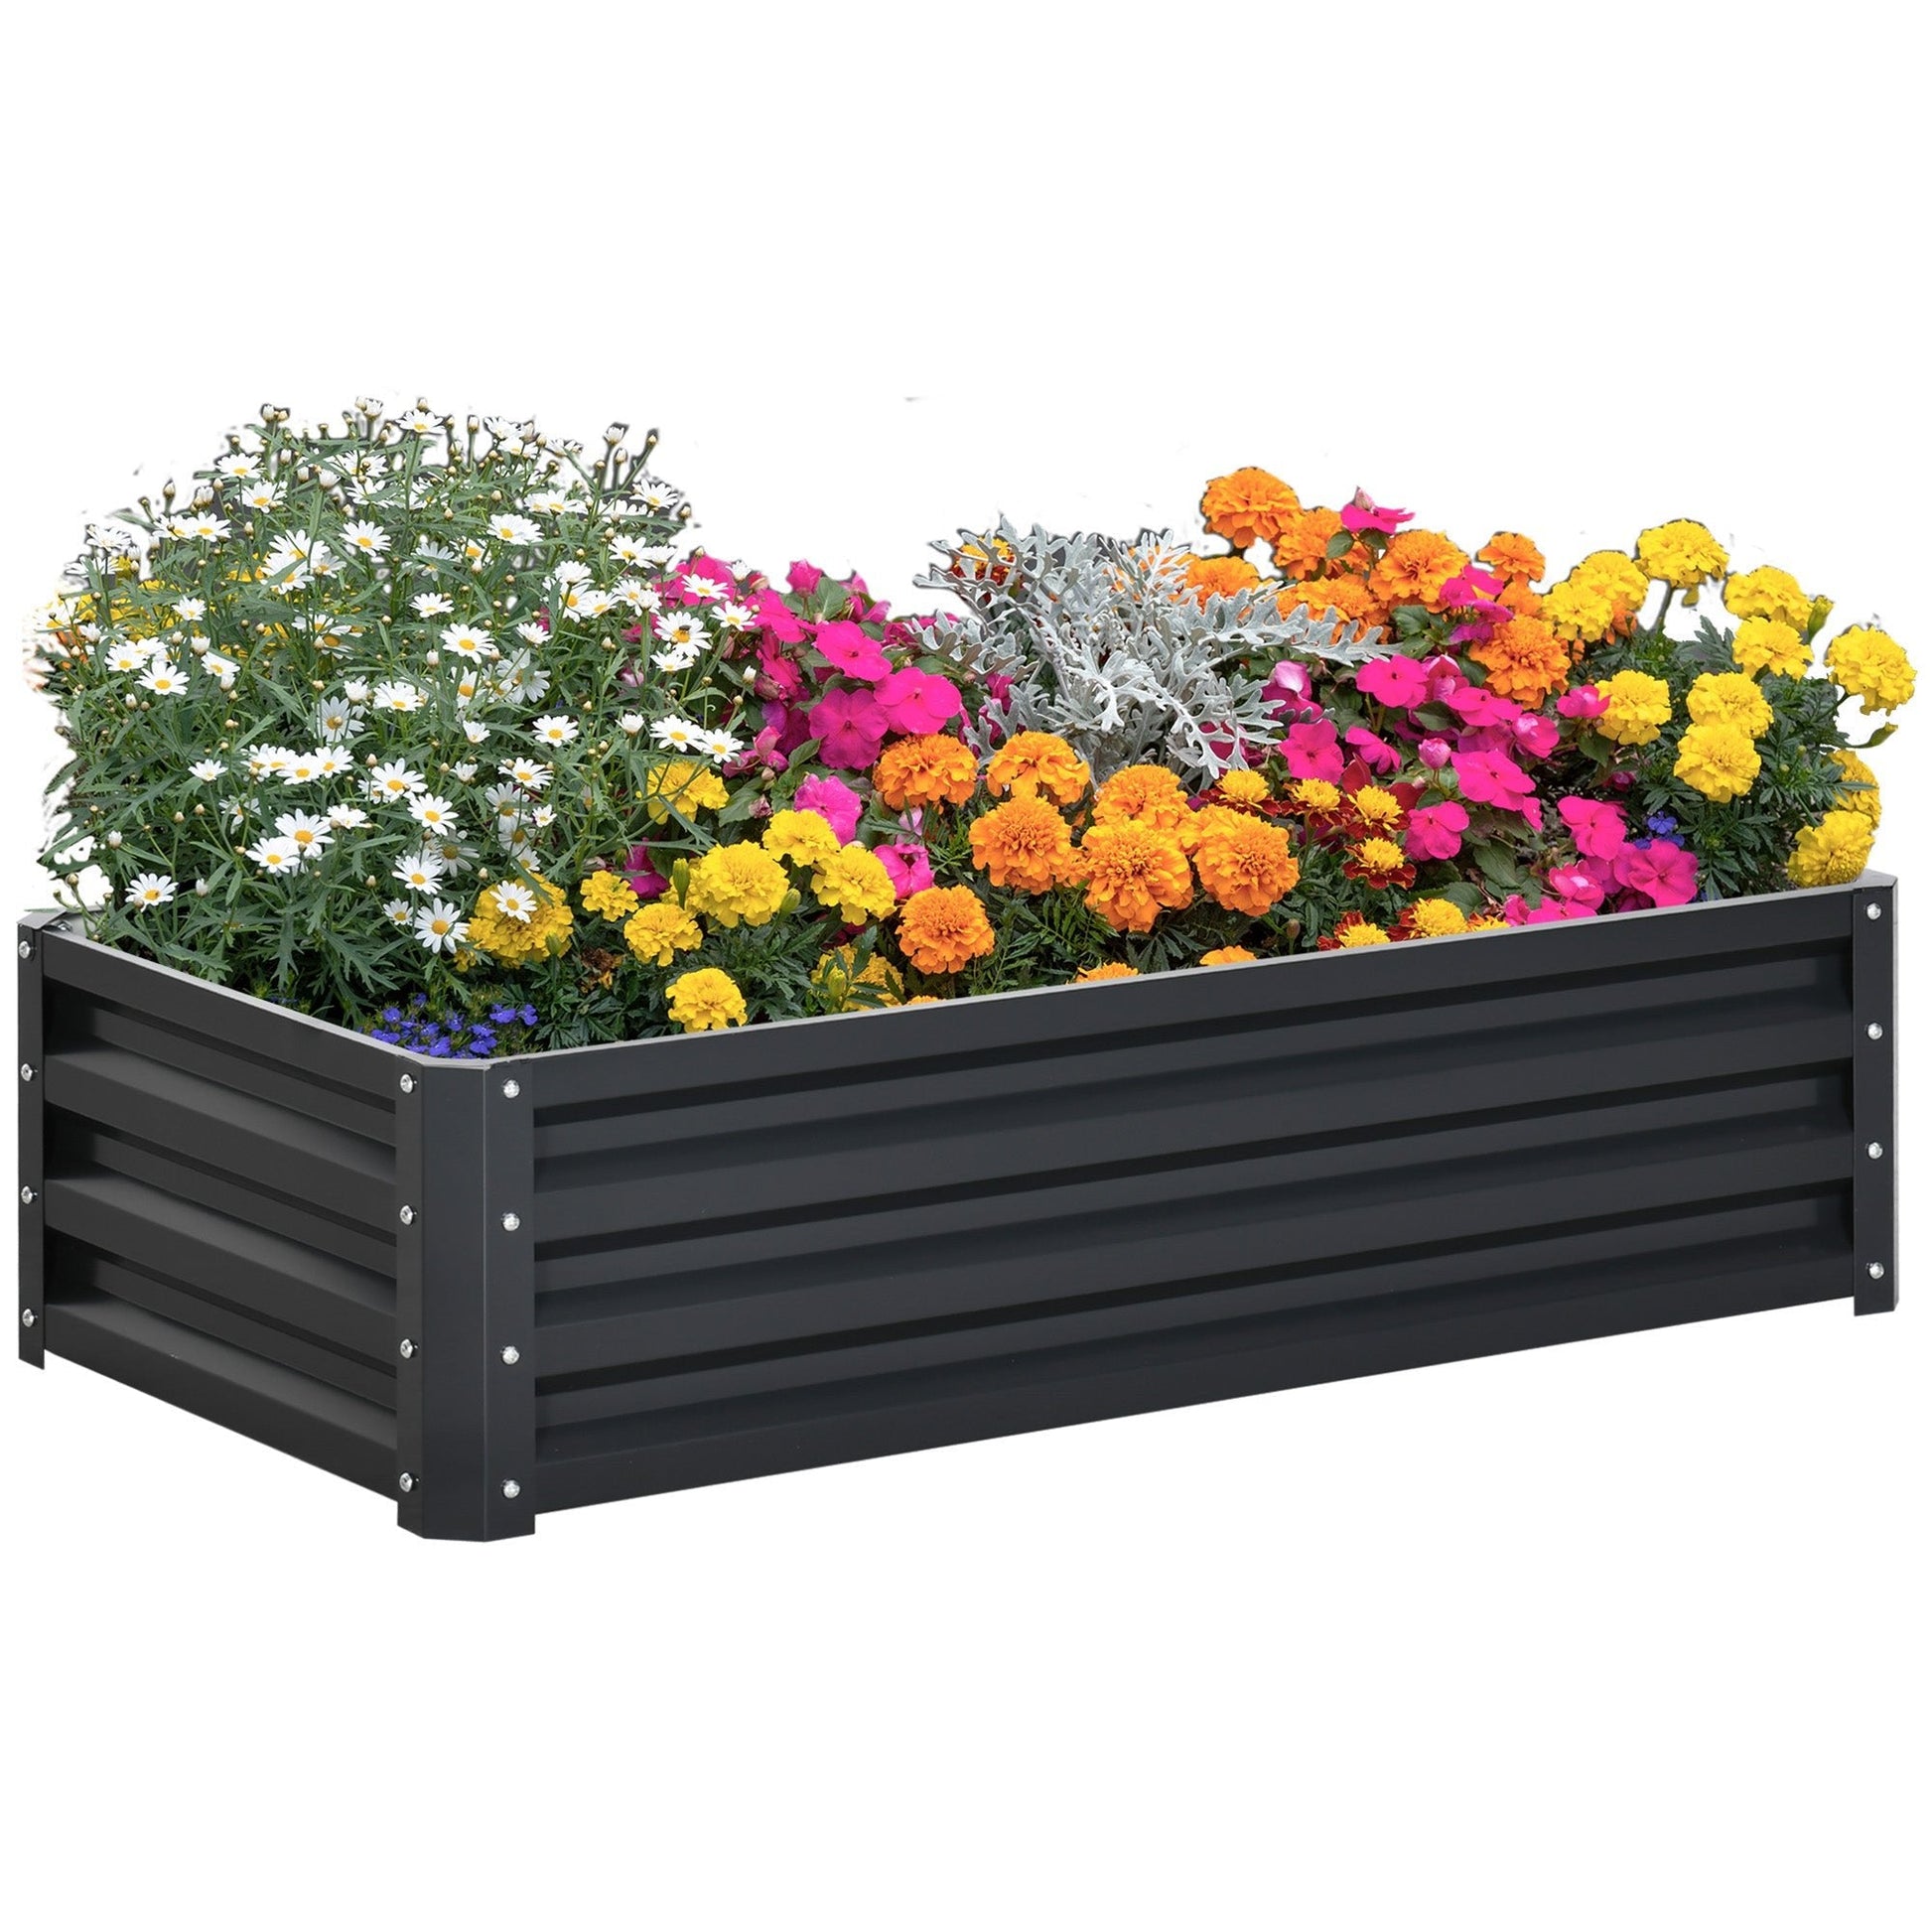 Galvanized Raised Garden Bed, Outdoor Planter Box for Vegetables, Flowers, Herbs, 4' x 2' x 1', Grey at Gallery Canada